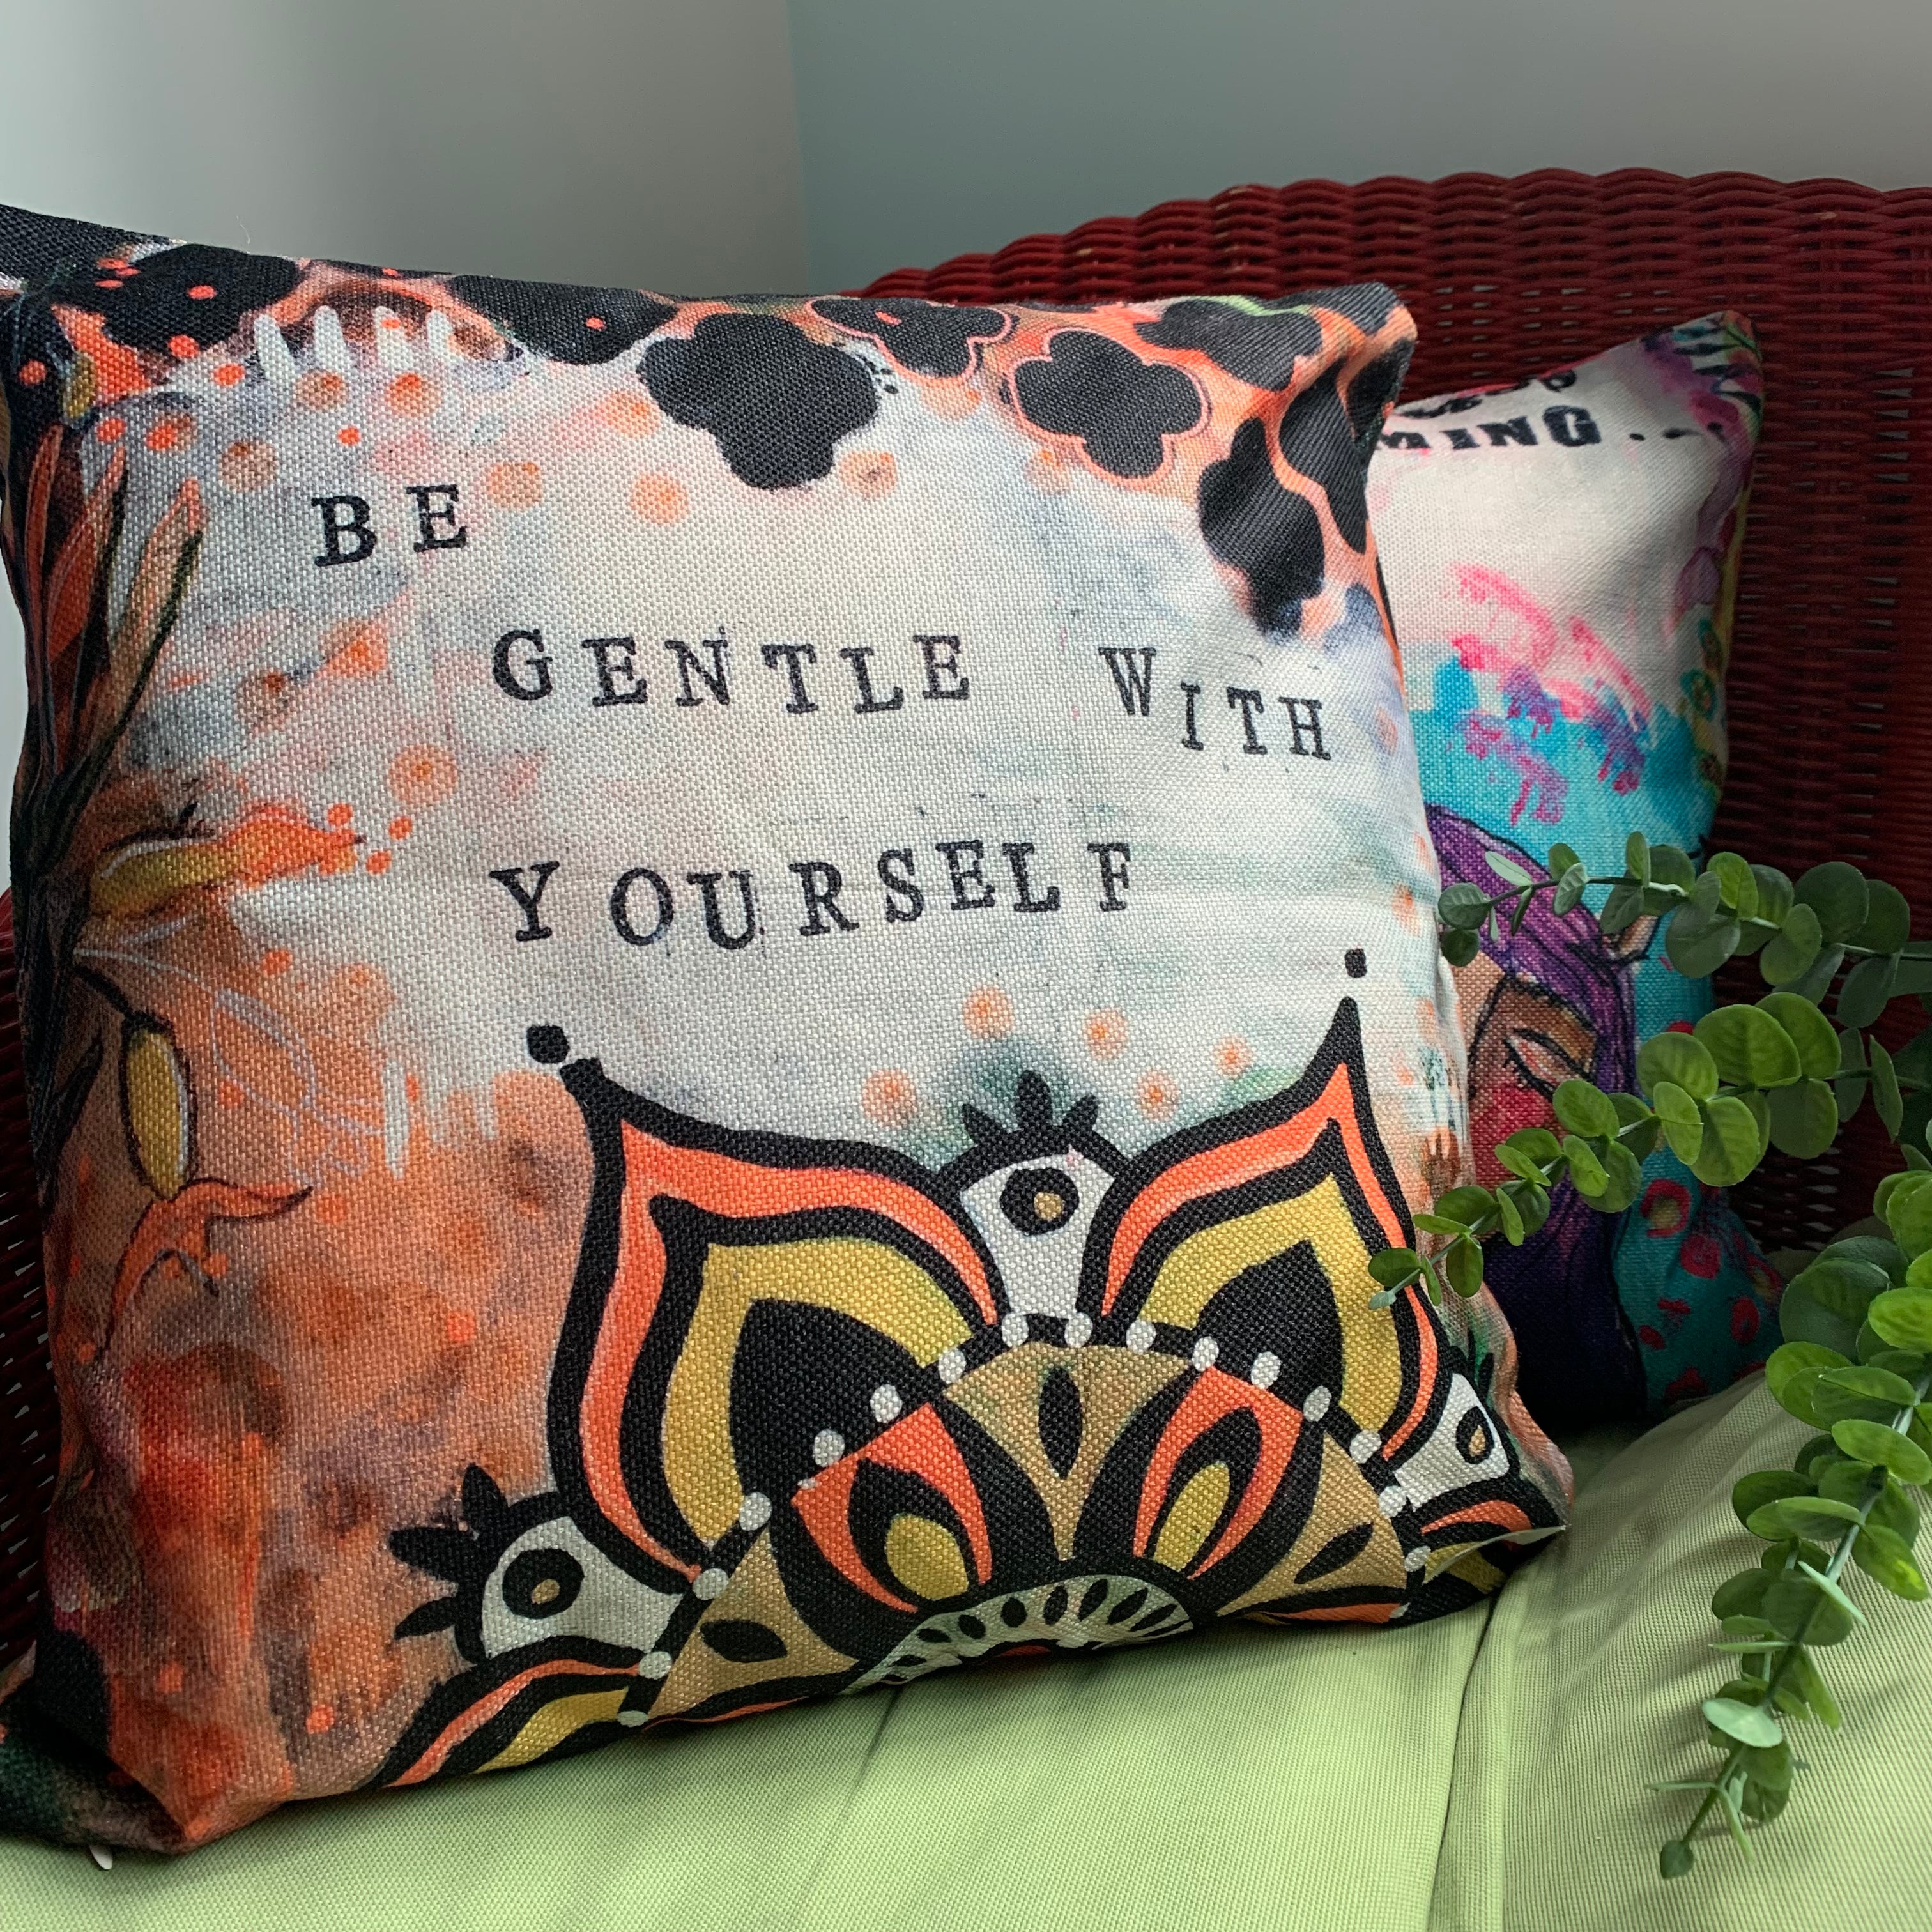 Be gentle with yourself scatter cushion by Adeluen's Art